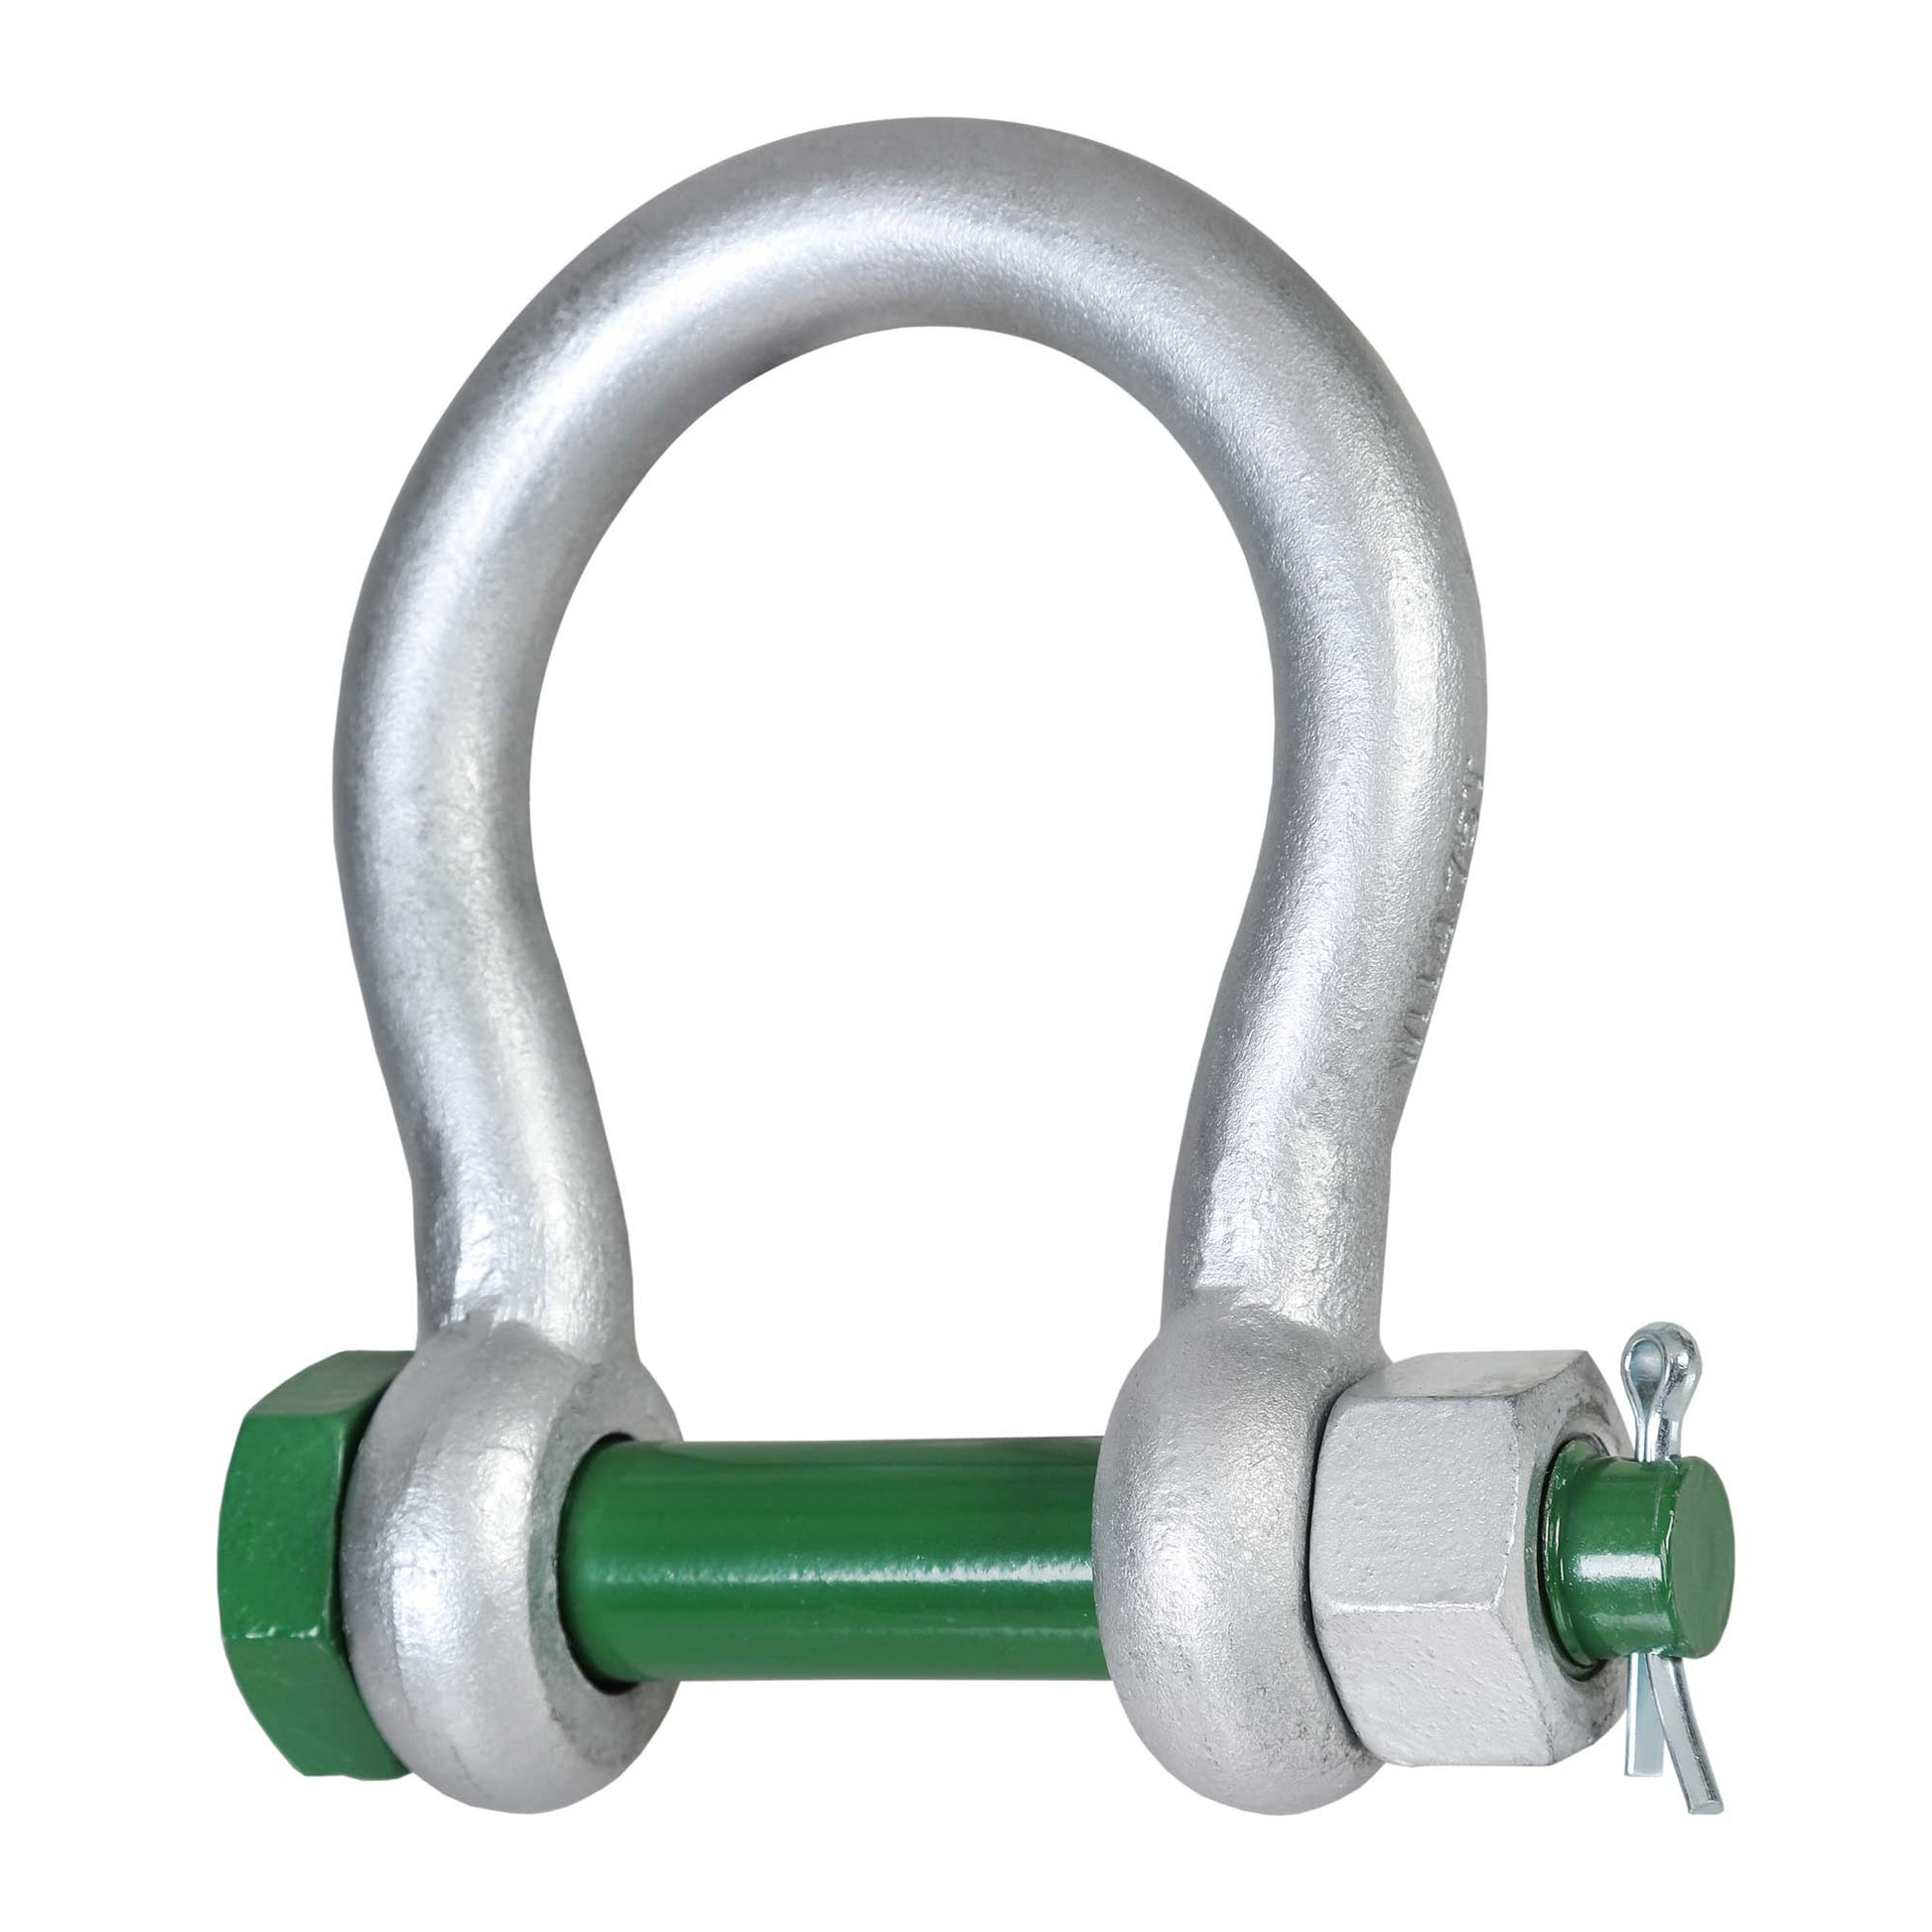 2-1/2" Van Beest Green Pin® Bolt Type Wide Mouth Towing Shackle | G-4263 - 55 Ton primary image